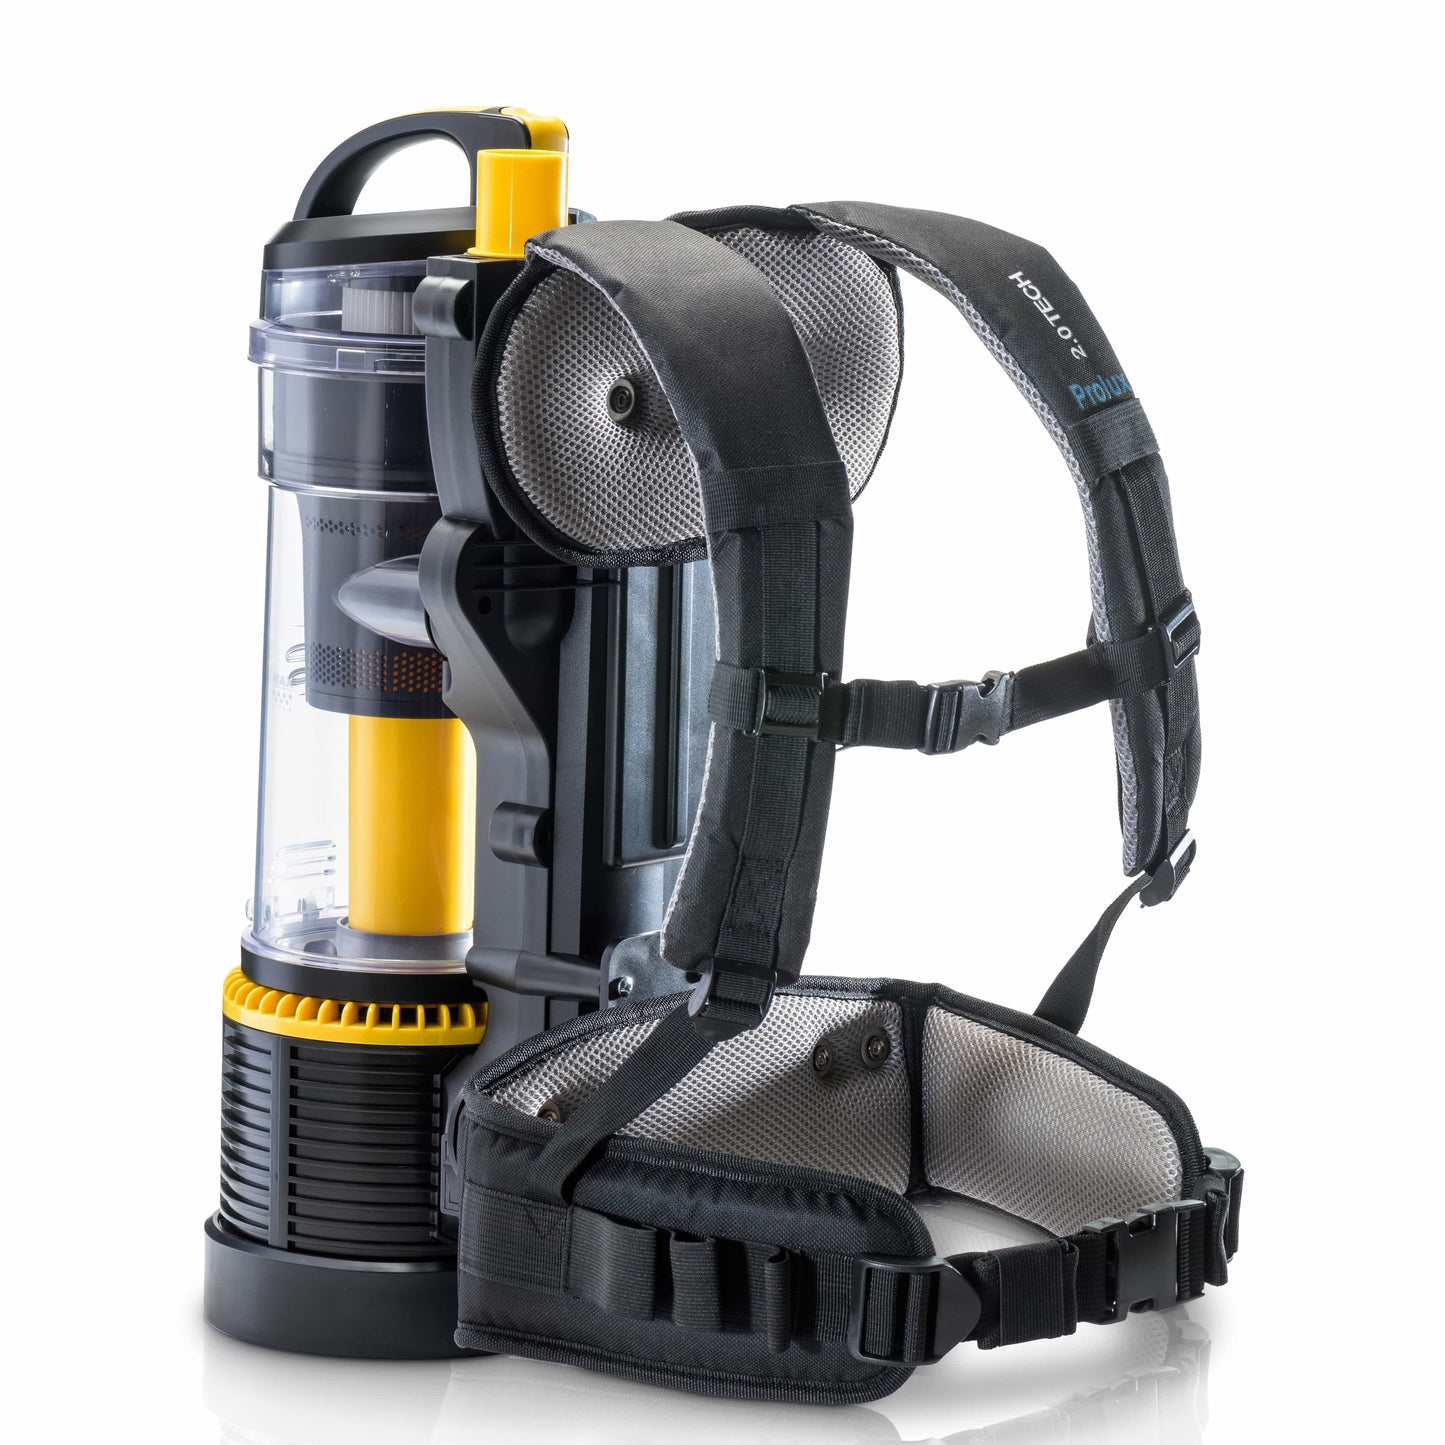 Demo Model Prolux 2.0 Commercial Bagless Backpack Vacuum w/ Deluxe 1 1/2 inch Tool Kit